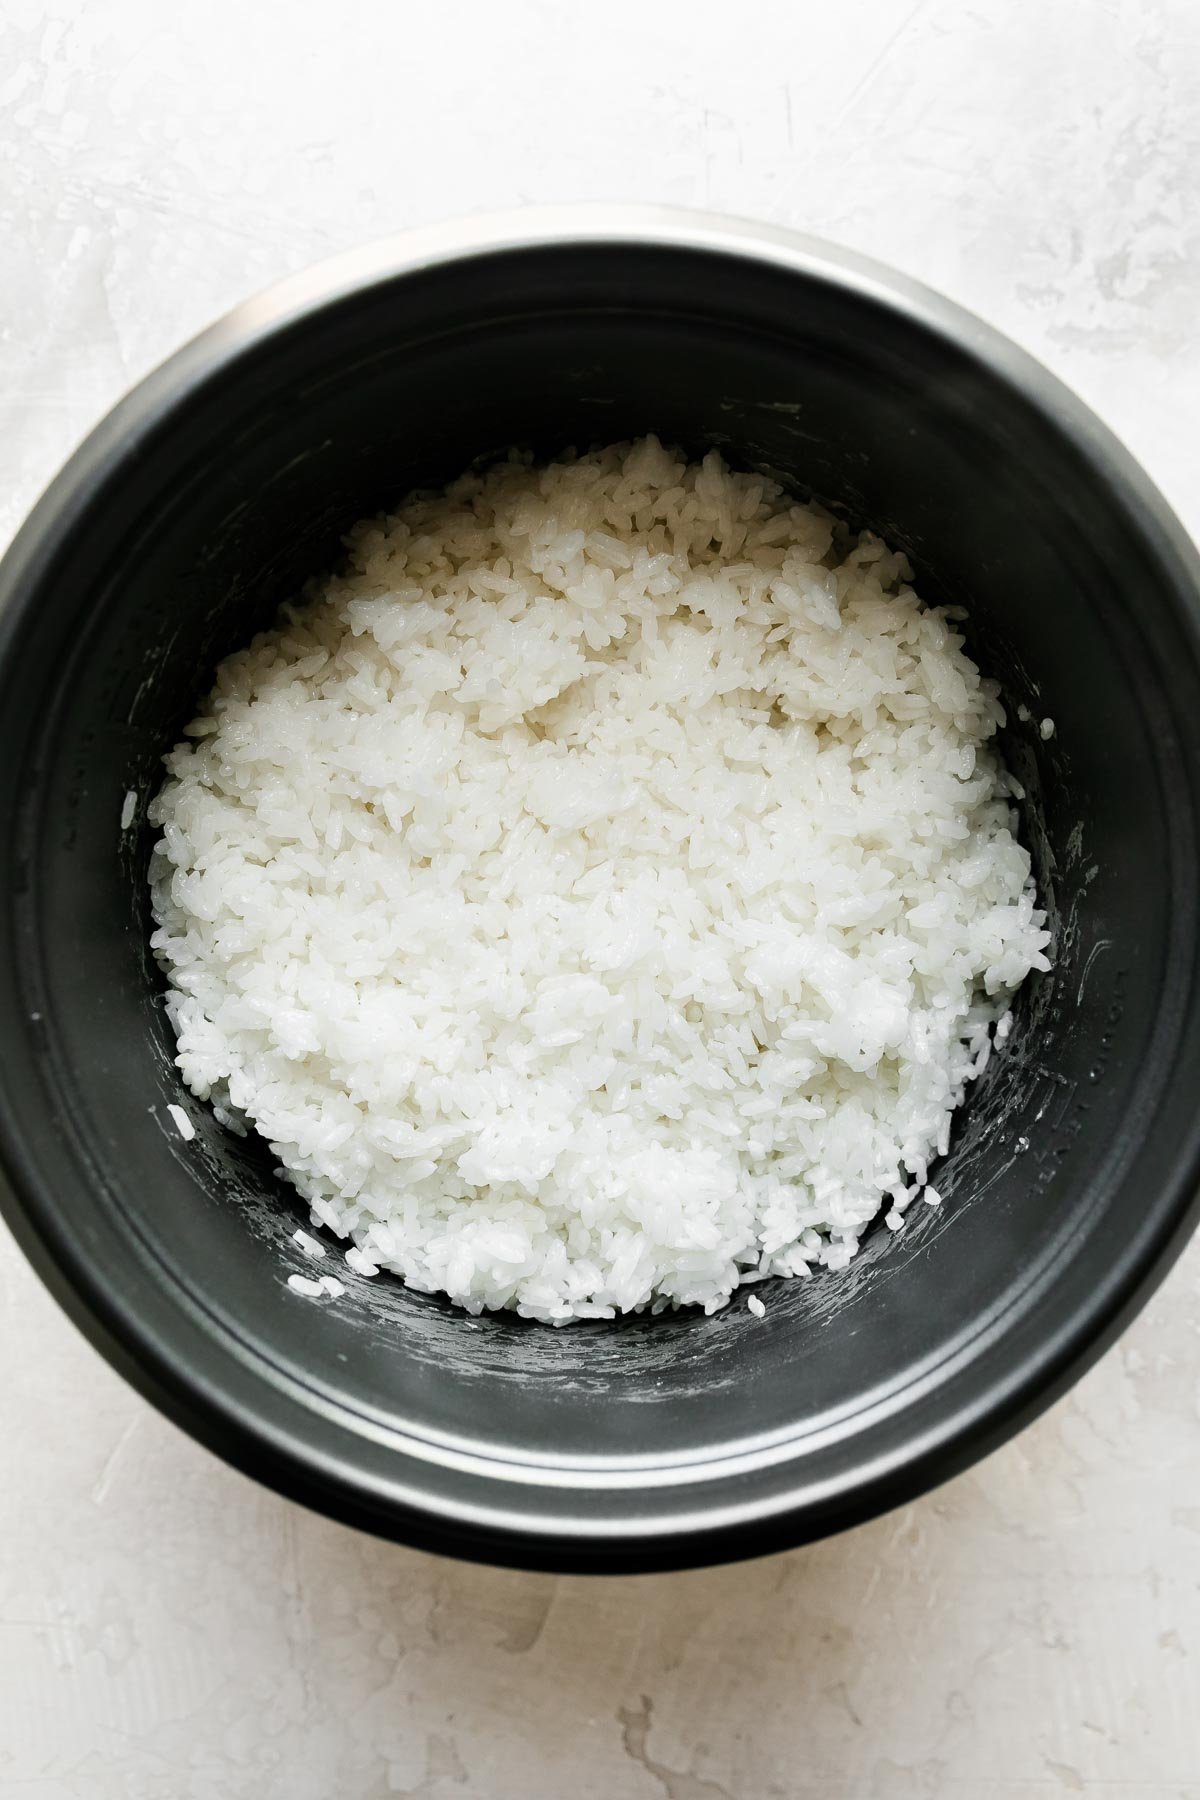 How to make Hawaiian spam musubi, step 1: Cook the rice. Cooked rice rests in the bottom of a pot-style rice cooker. The rice cooker rests atop a creamy white textured surface.